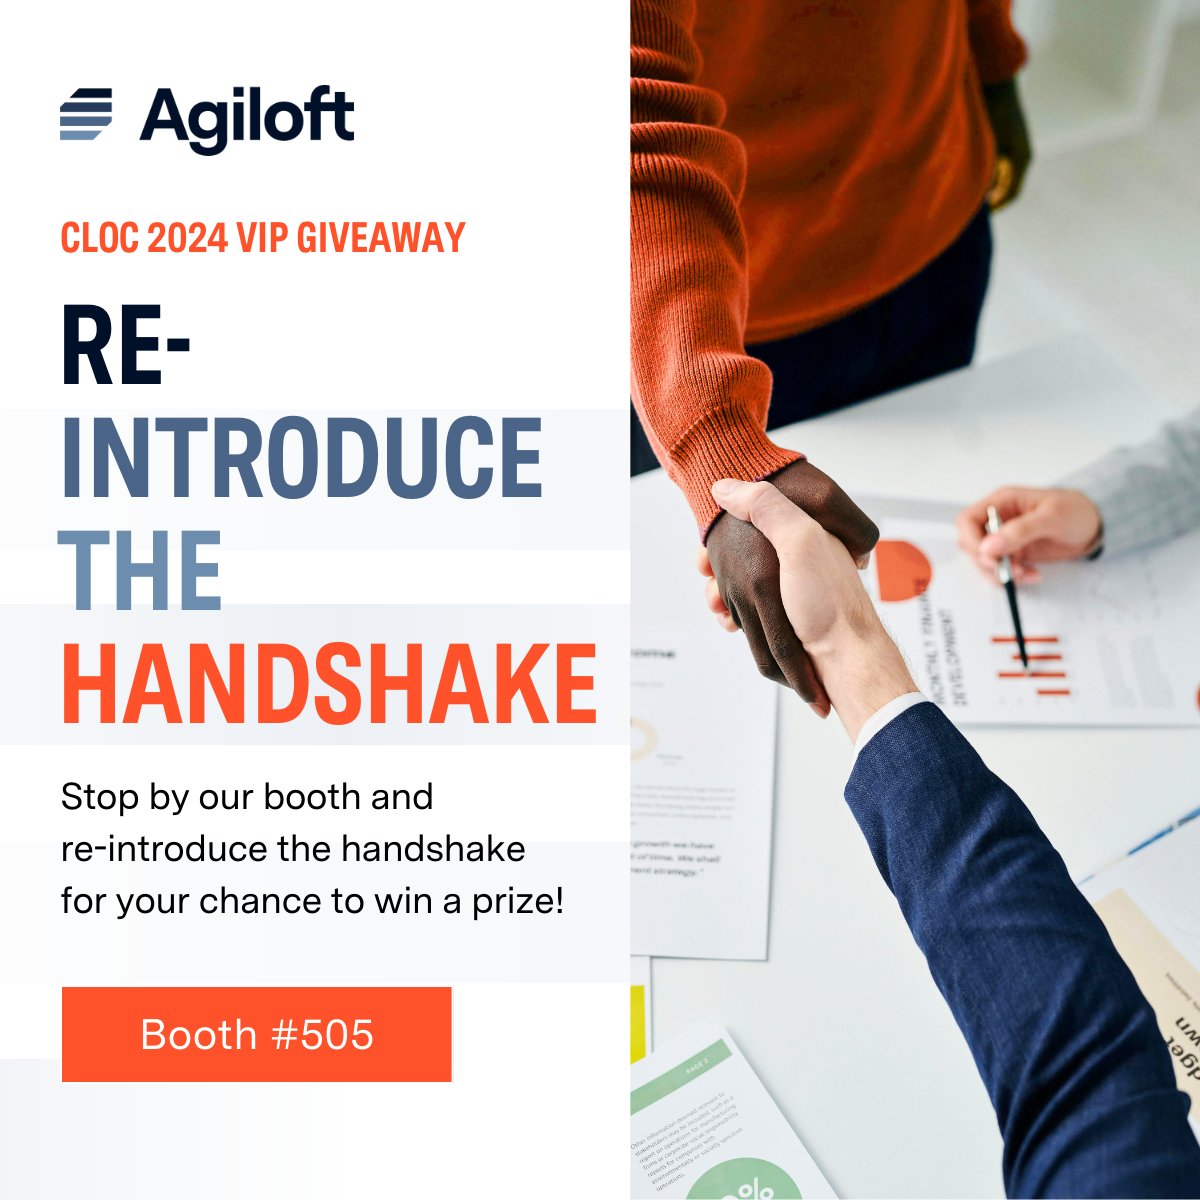 🚨 VIP CLOC Giveaway Alert! 🚨 If you're in Vegas at #CGI24, this is for you! Drop by our booth (#505) and re-introduce the handshake with us for a chance to win a prize! #CLOC #CGI24 #CLOC2024 #ReintroducingTheHandshake